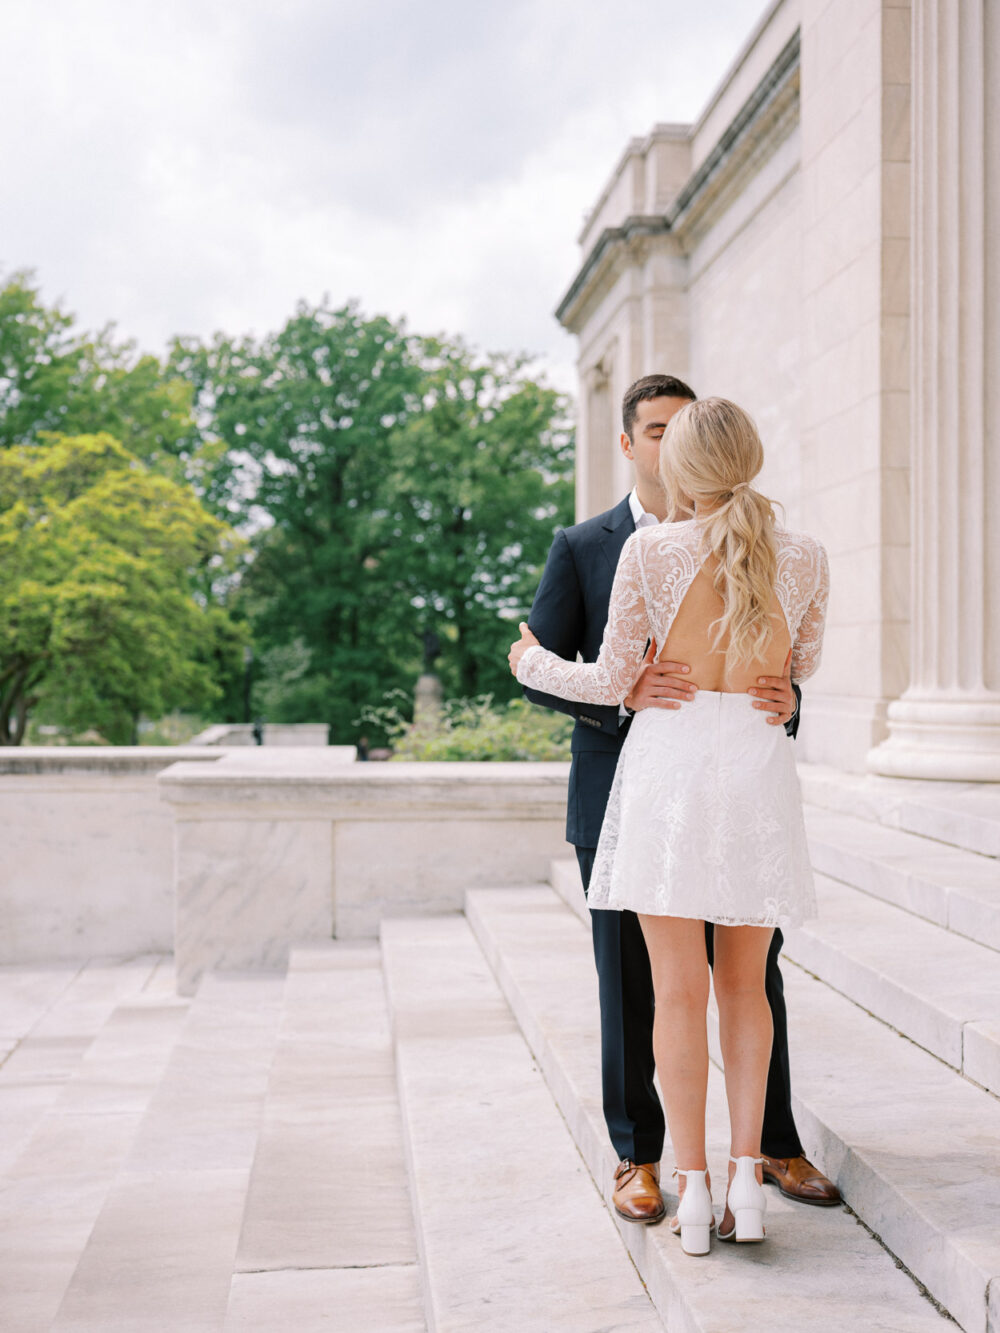 Cleveland engagement photos by Juliana Kae at the Cleveland Art Museum